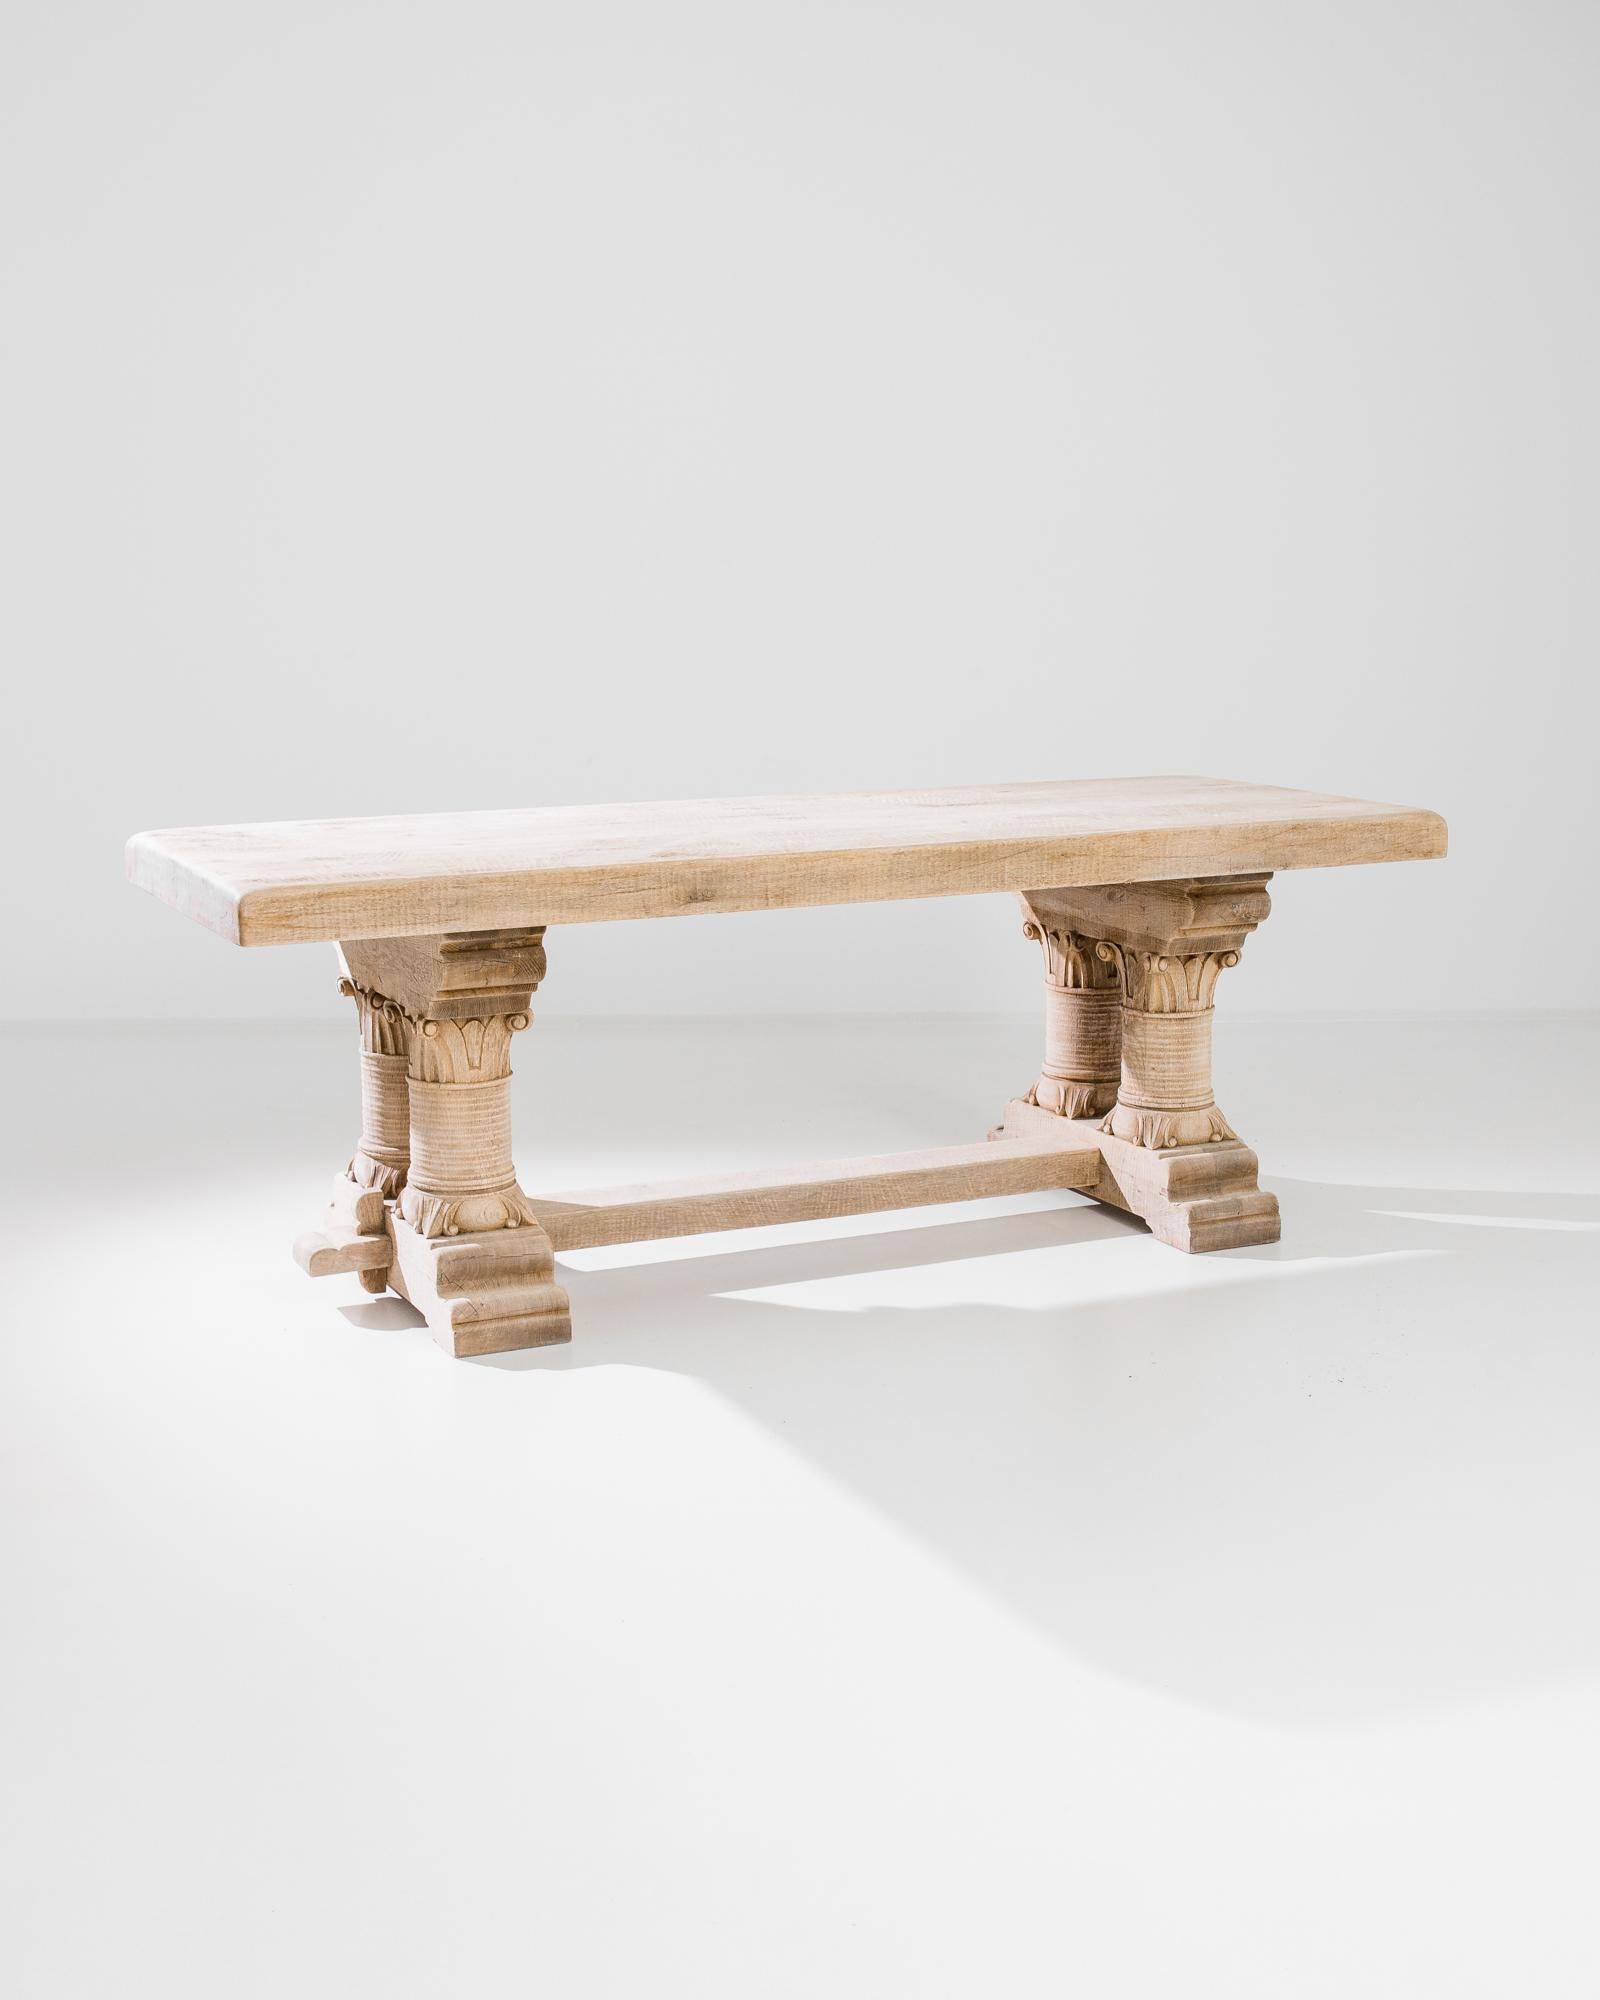 Made in France circa 1970, this rustic dining table features a smooth tabletop elevated on masterfully carved wooden legs connected by a stretcher. Defined by the characteristics of durability and strength, this original table crafted out of solid